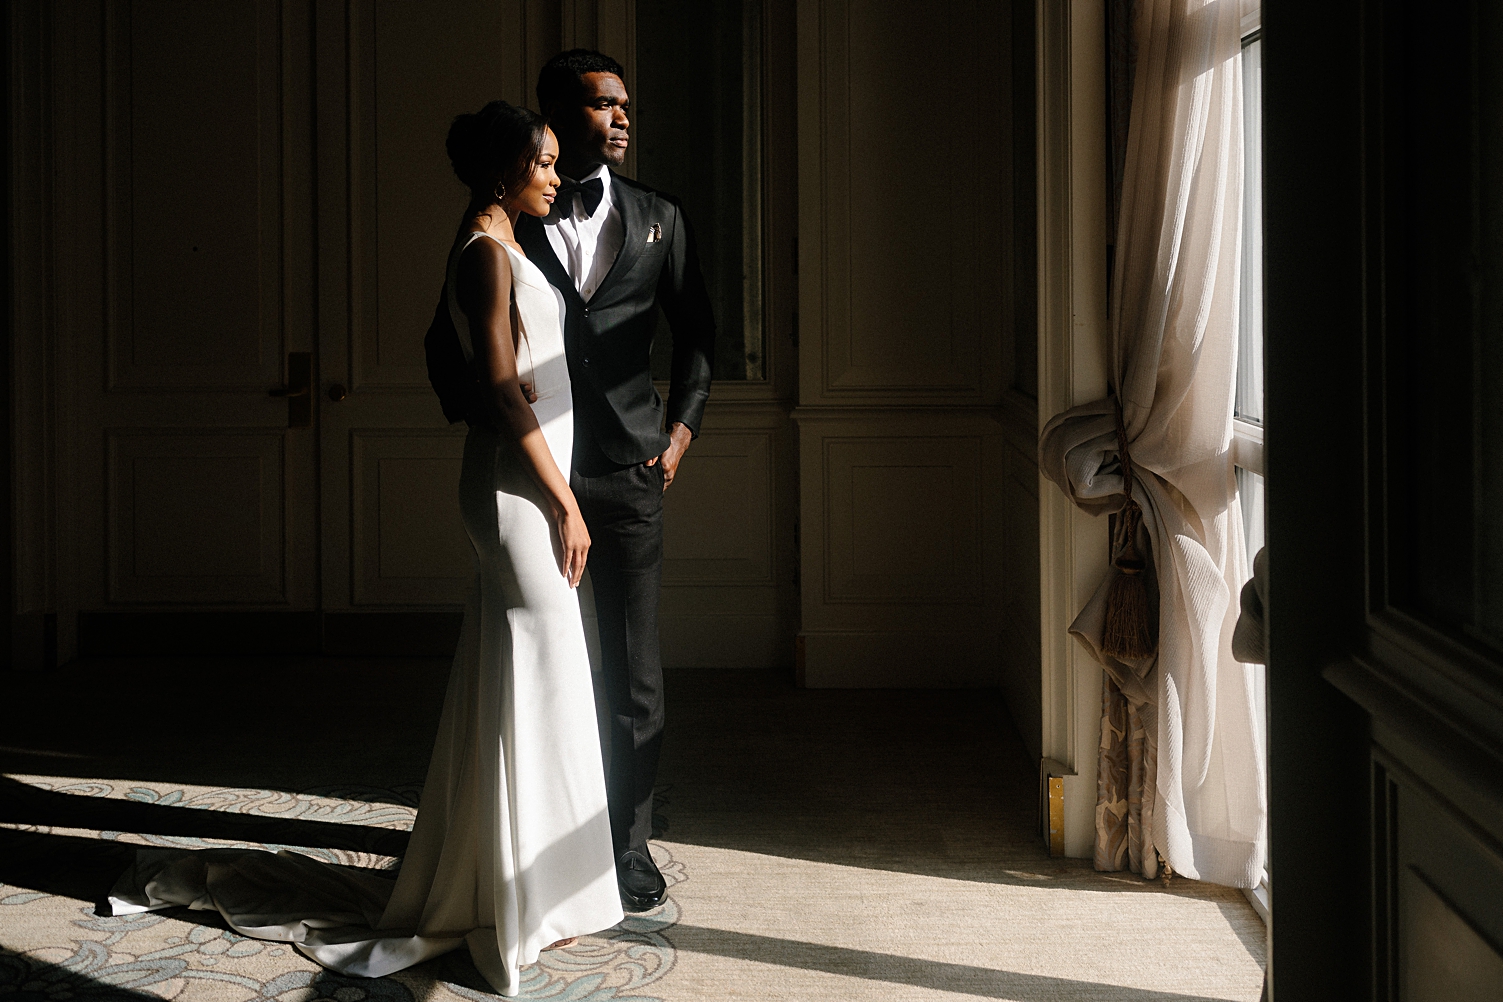 Black bride and groom standing together in front of window